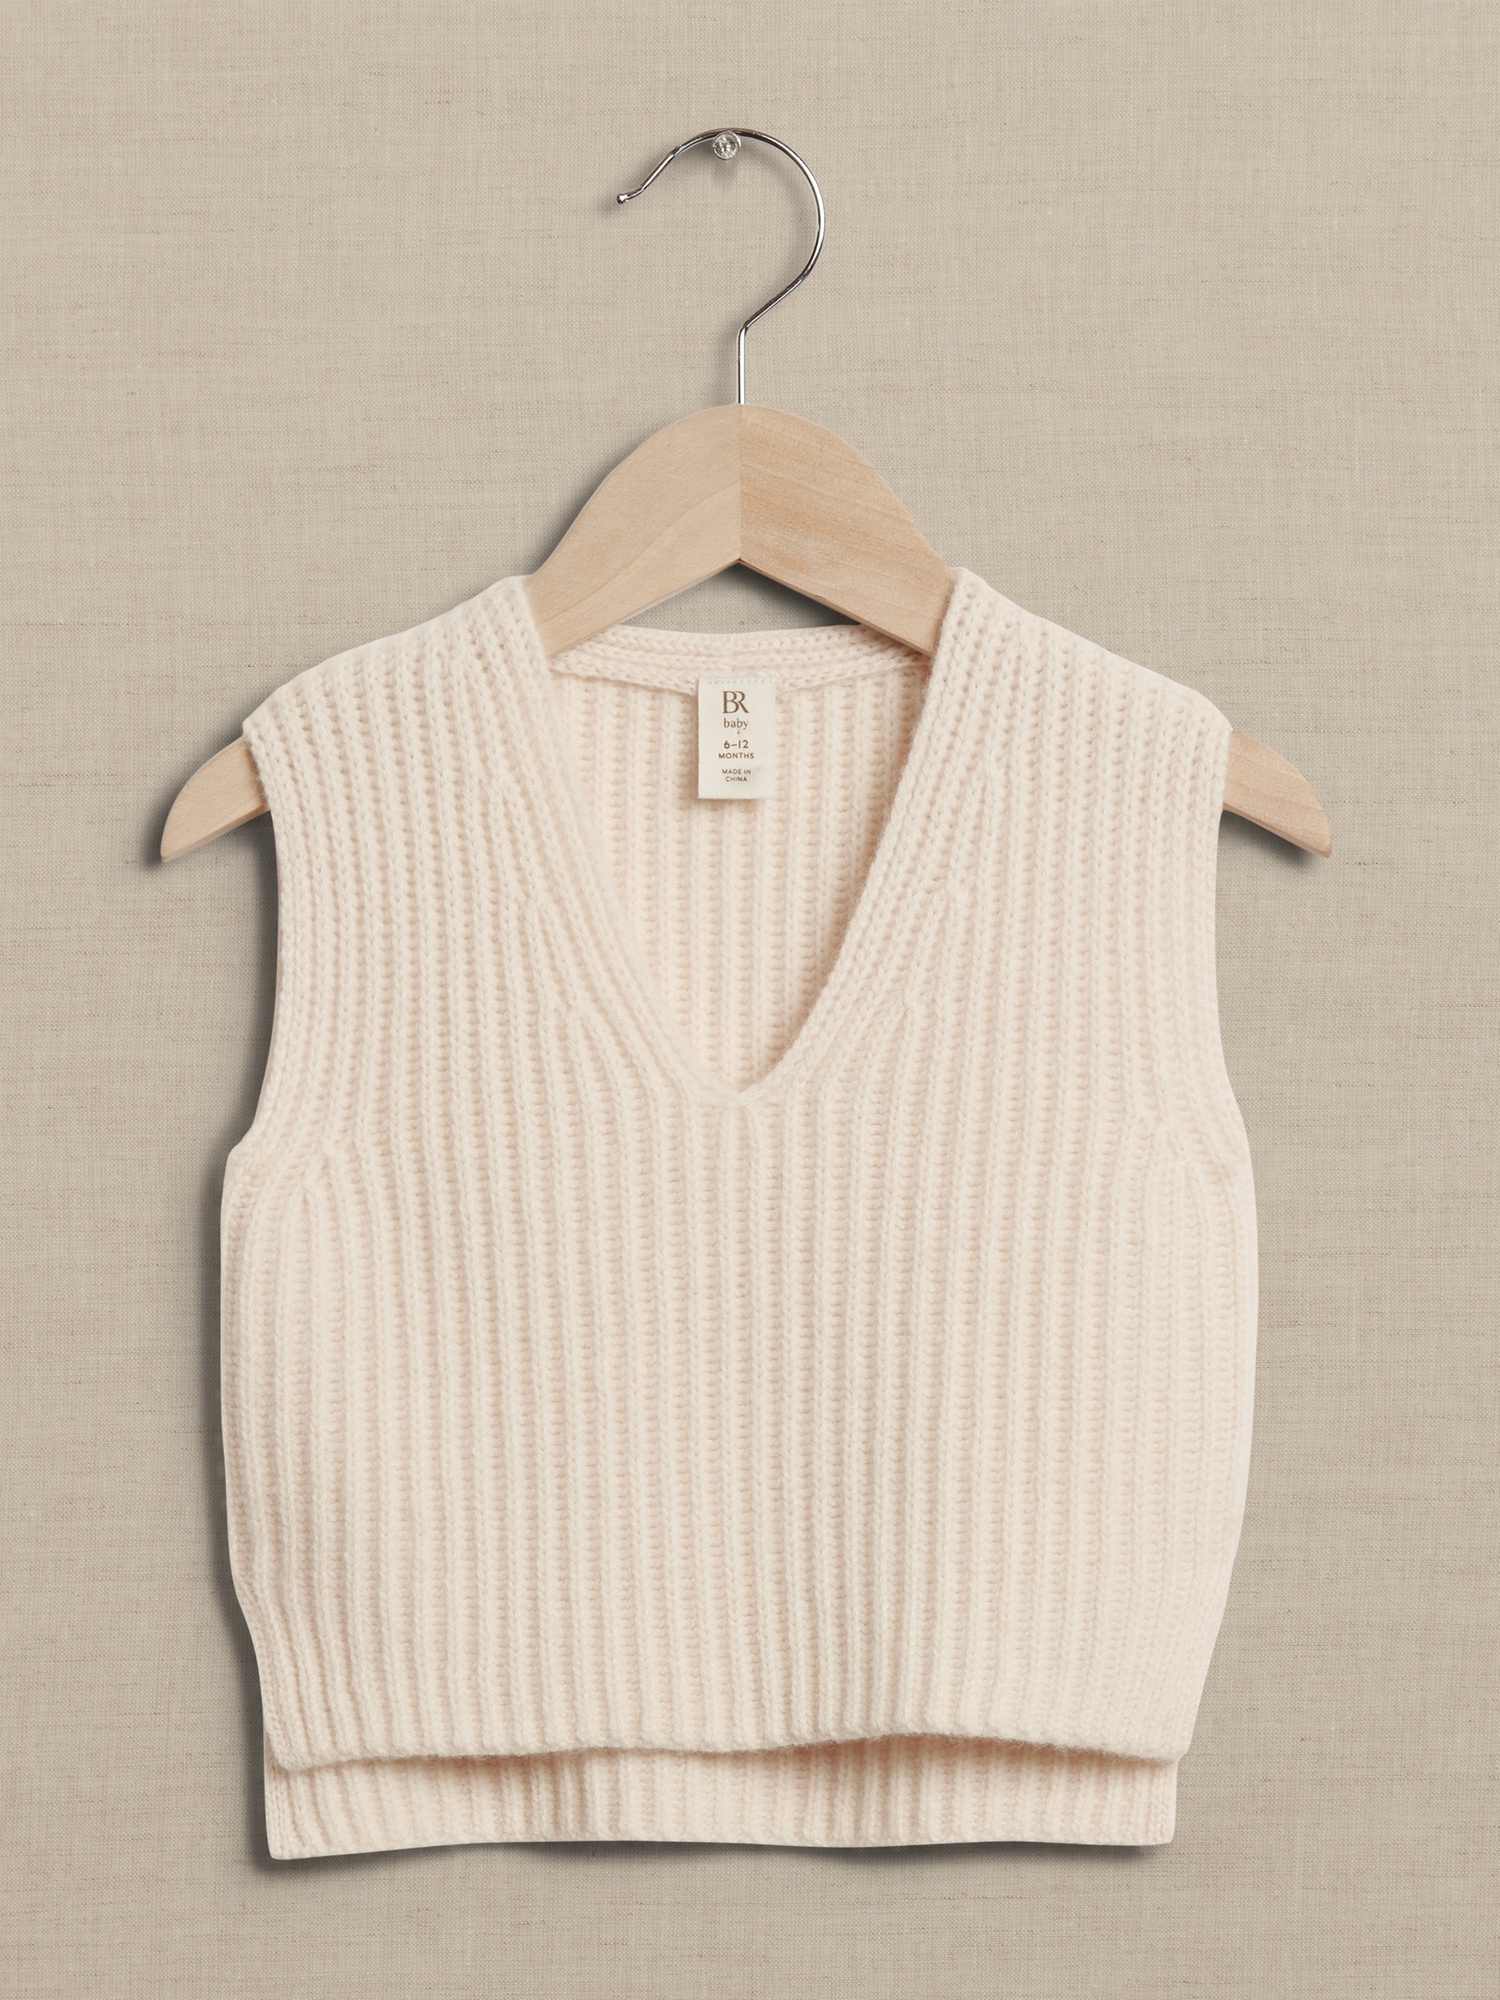 Banana Republic Cashmere Sweater Vest for Baby beige. 1